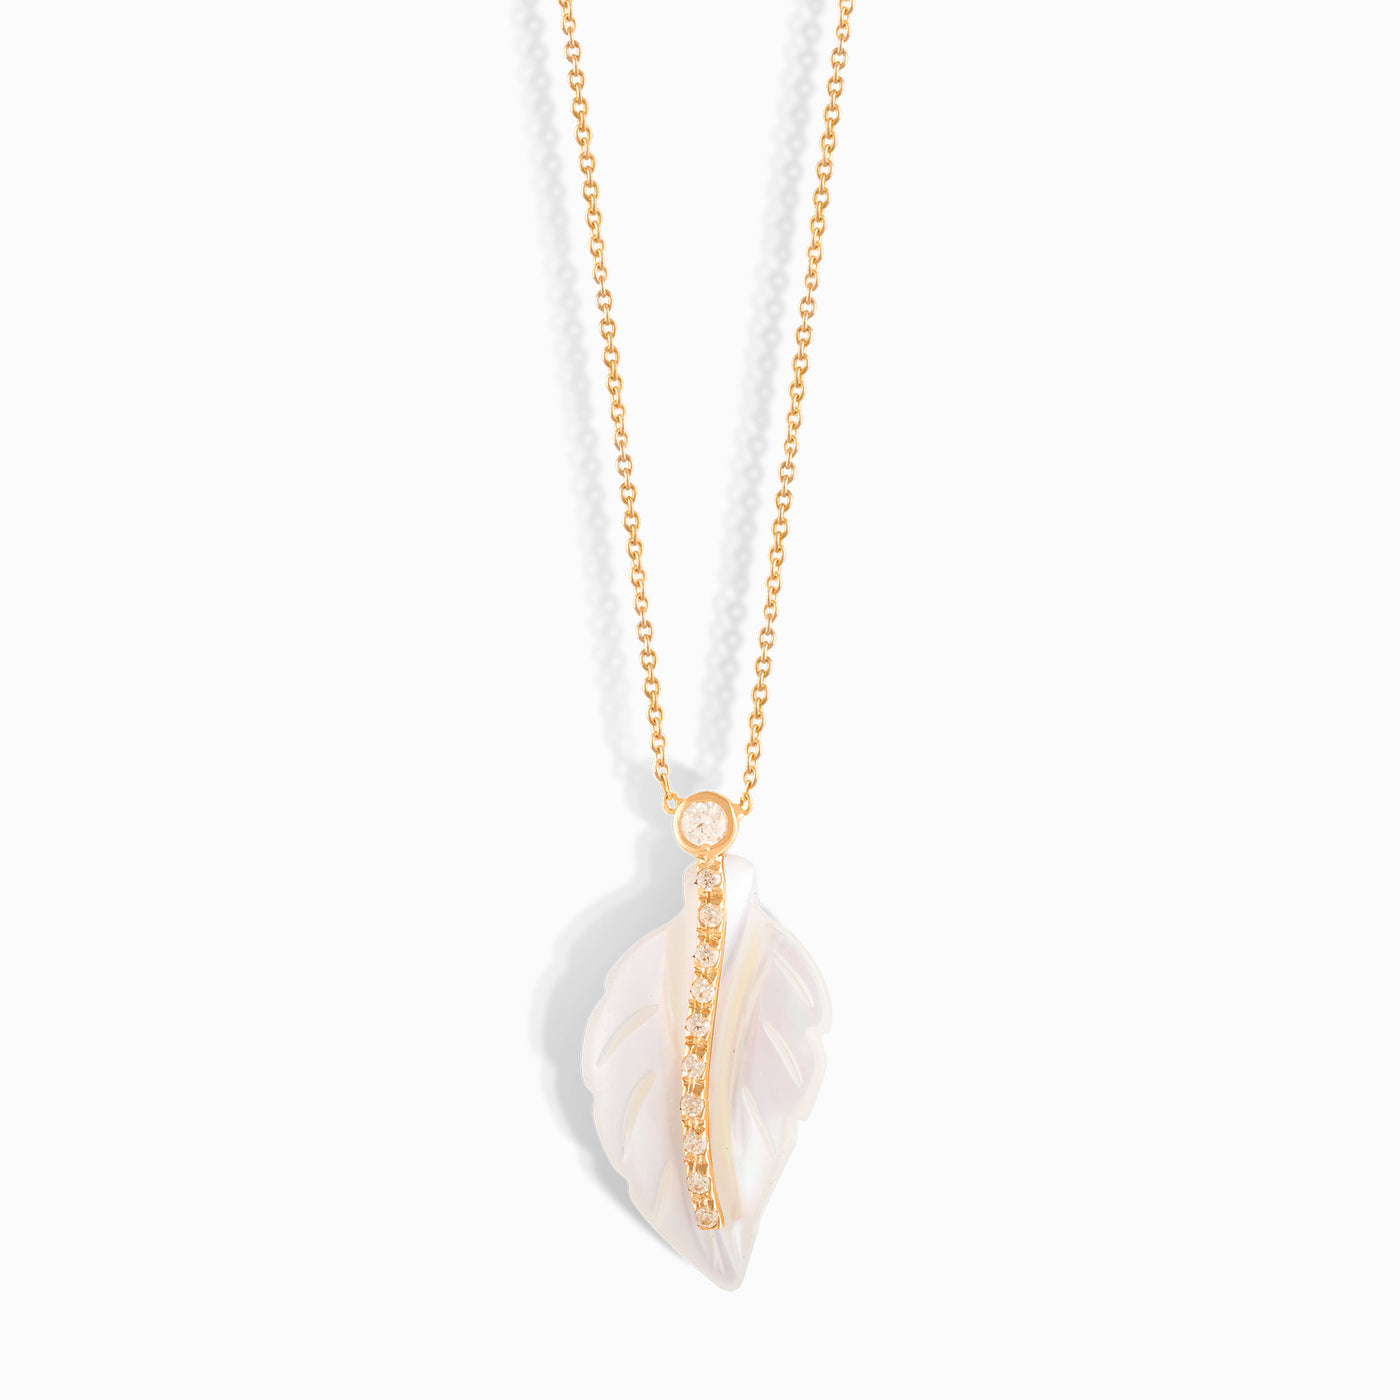 Feather and Diamonds Necklace